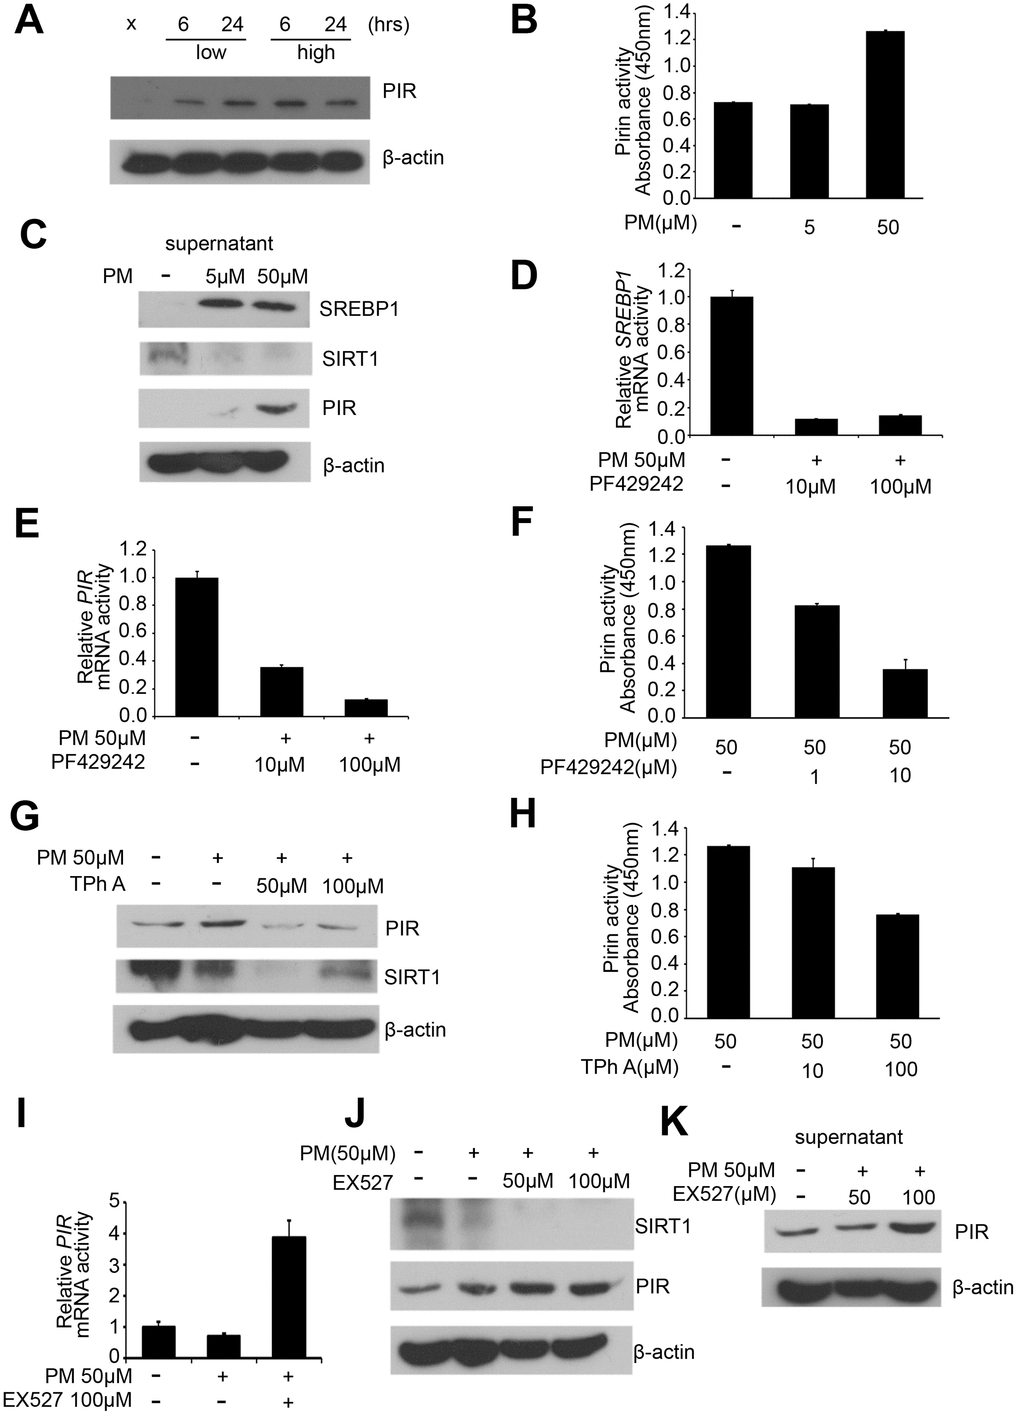 PM exposure is positively correlated with activation of the SREBP1-PIR signaling pathway through SIRT1 downregulation. (A) Western blot analysis of PIR after PM treatment in HPF. (B) PIR activity from cell culture supernatant in PM-induced models. (C) Levels of SREBP1, SIRT1, and PIR were measured from cell culture supernatant of PM-induced models. (D) mRNA levels of SREBP1 in PF429242-PM co-treated HPF models. (E) mRNA levels of PIR in PF429242-PM co-treated HPF models. (F) PIR activity from cell culture supernatant in PF429242-PM co-treated HPF models. (G) Western blot analysis of PIR and SIRT1 in TPh A-PM co-treated HPF models. (H) PIR activity from cell culture supernatant in TPh A-PM co-treated HPF models. (I) mRNA level of PIR in Ex527-PM co-treated HPF models. (J) Western blot analysis of SIRT1 and PIR in Ex527-PM co-treated HPF models. (K) Level of PIR was measured from cell culture supernatant in Ex527-PM co-treated HPF models.